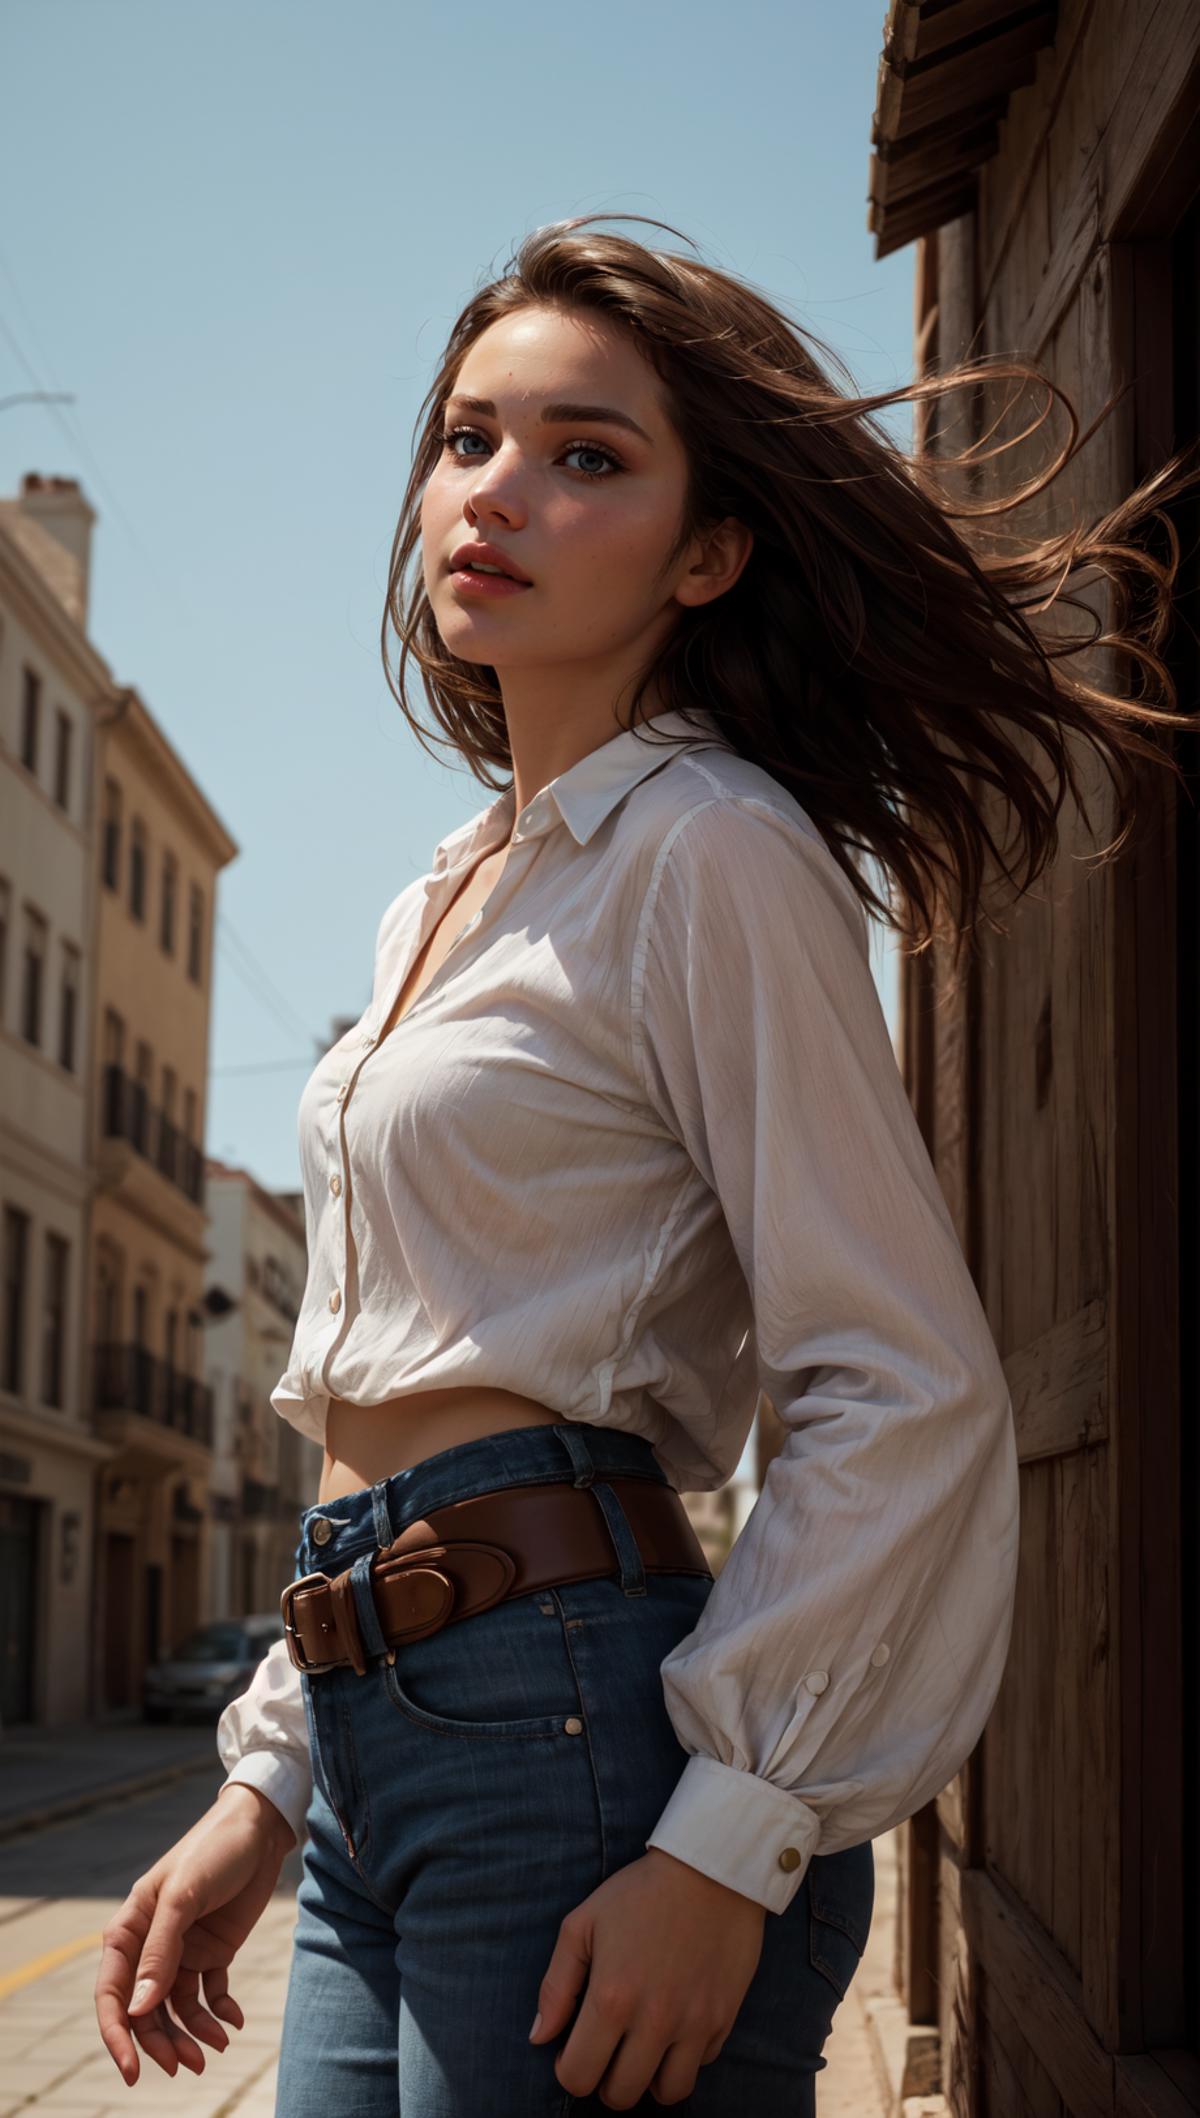 A woman wearing a white shirt and blue jeans with a brown belt.